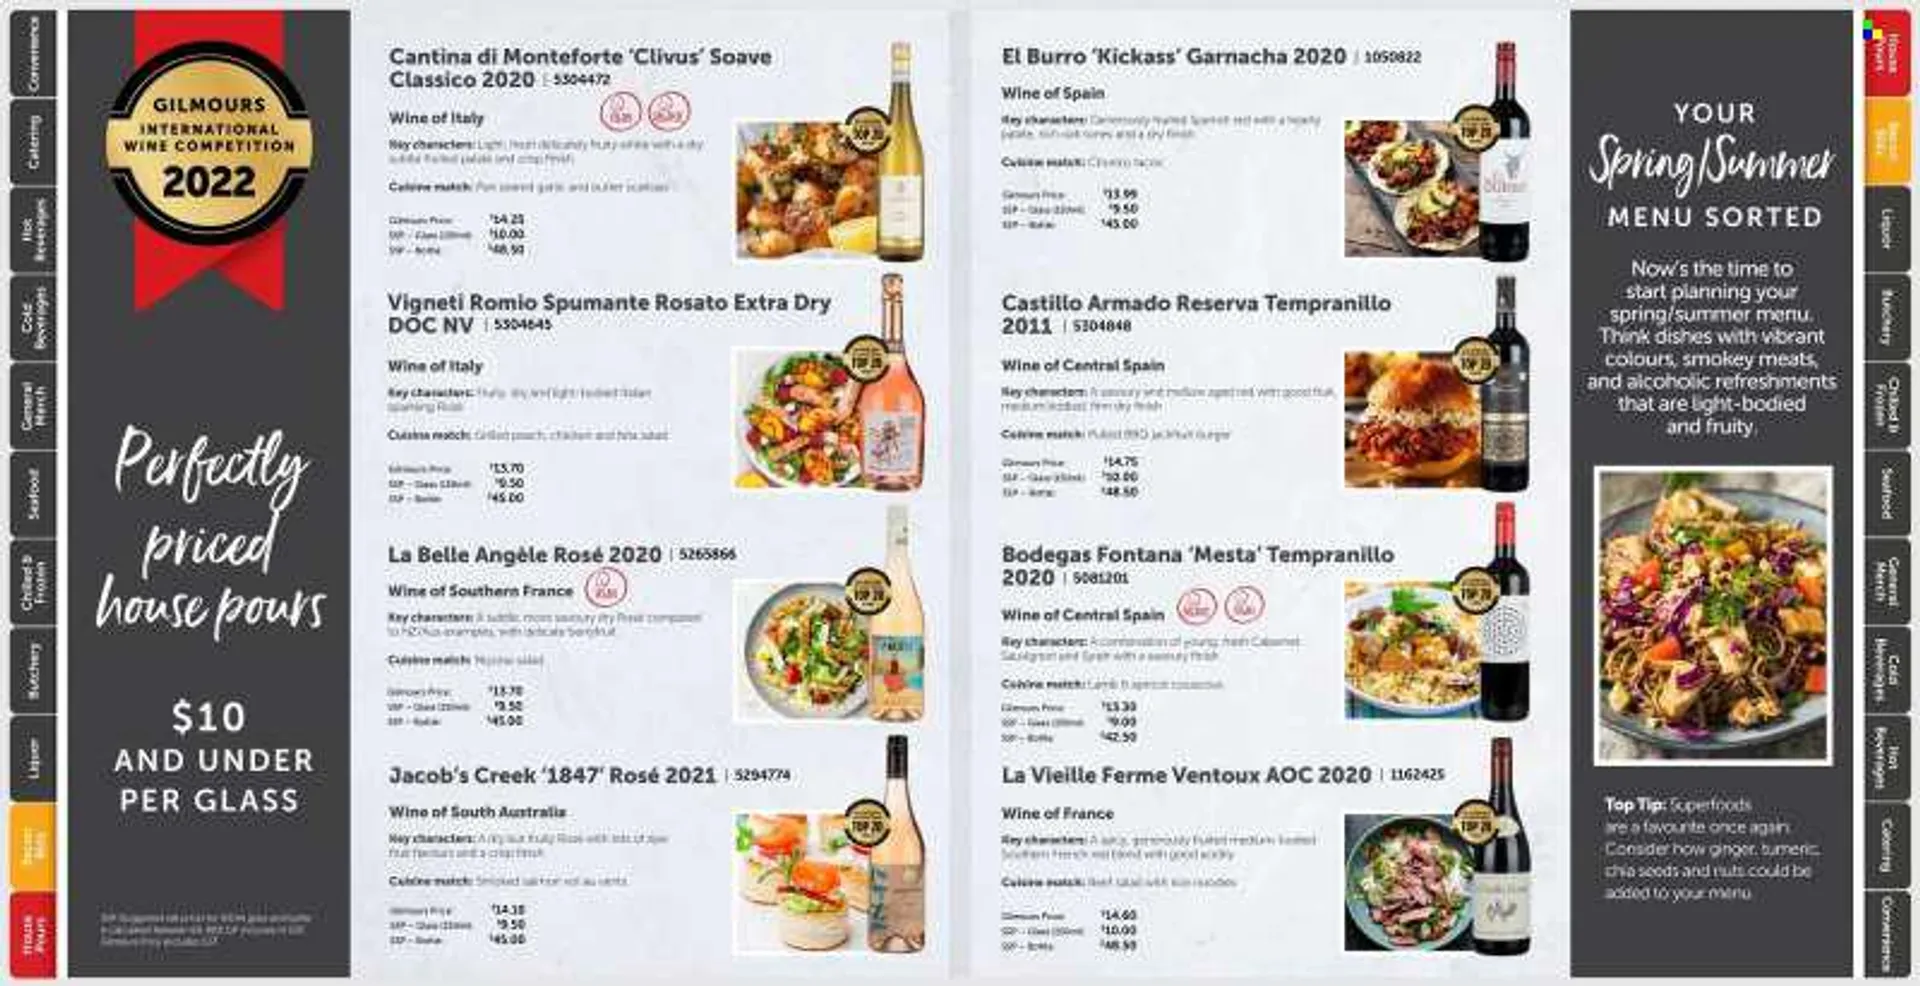 Gilmours mailer - 20.06.2022 - 17.07.2022 - Sales products - tacos, garlic, ginger, salad, salmon, scallops, smoked salmon, seafood, hamburger, noodles, bacon, chorizo, feta cheese, butter, couscous, rice vermicelli, chia seeds, Classico, nuts, Cabernet S